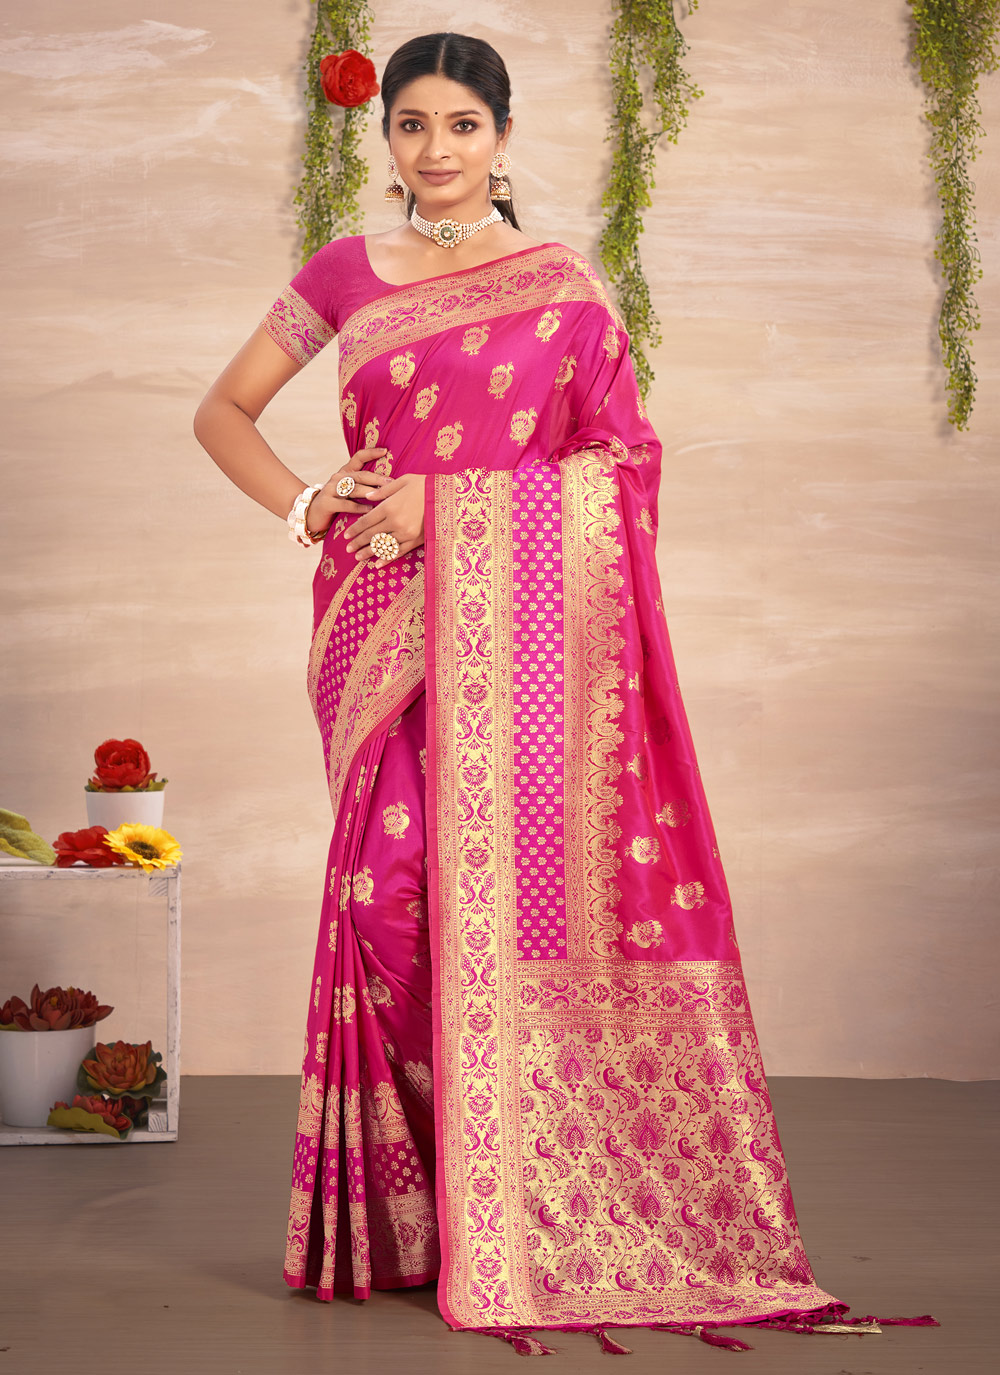 Sangam Jubilee collection 2